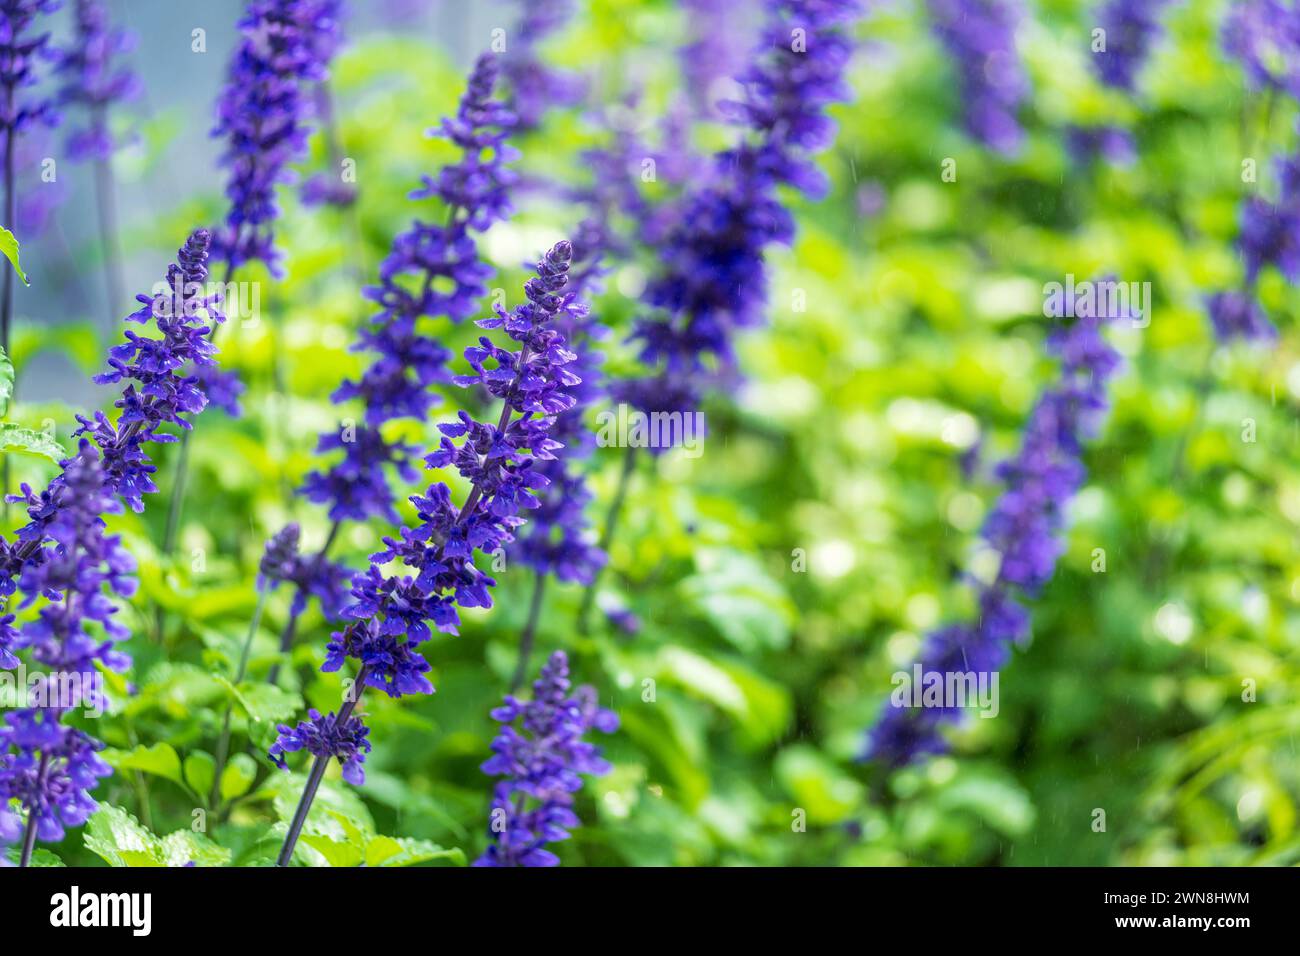 Close-up of purple salvia mystic spires blue plants basking in soft sunlight, with a fresh, natural background Stock Photo